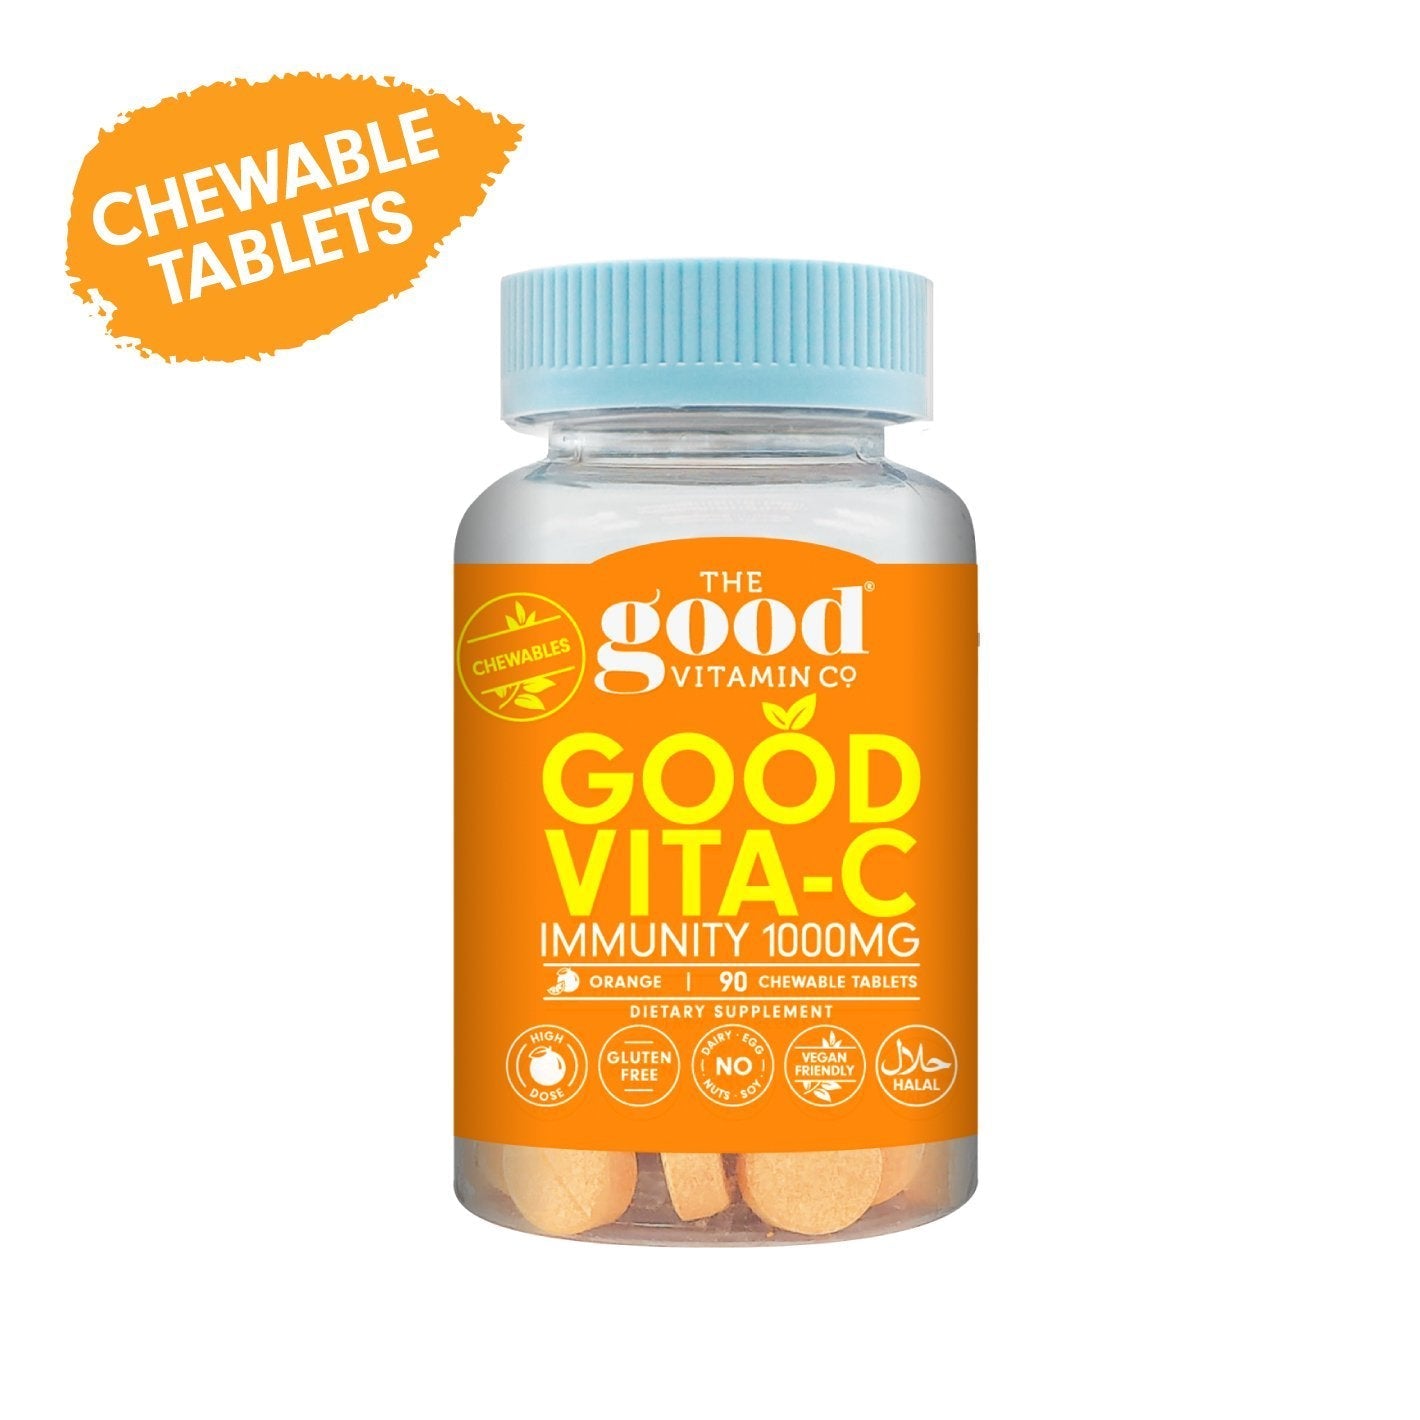 The Good Vitamin Co. Health - Immune Support Good Vitamin C 1,000mg Immune System Supplements 90 Chewable Tablets